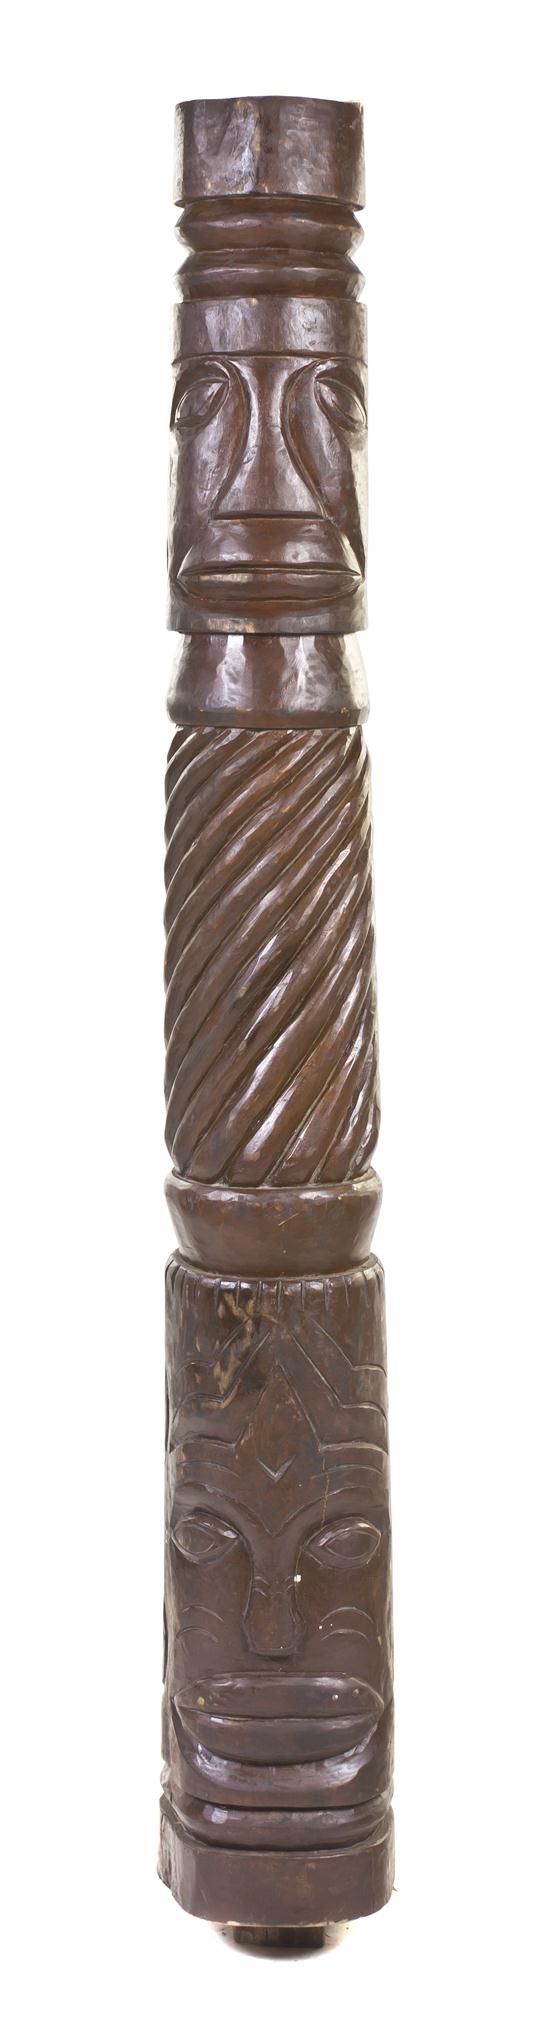 A Carved Wood Tiki Totem of cylindrical 1554c8